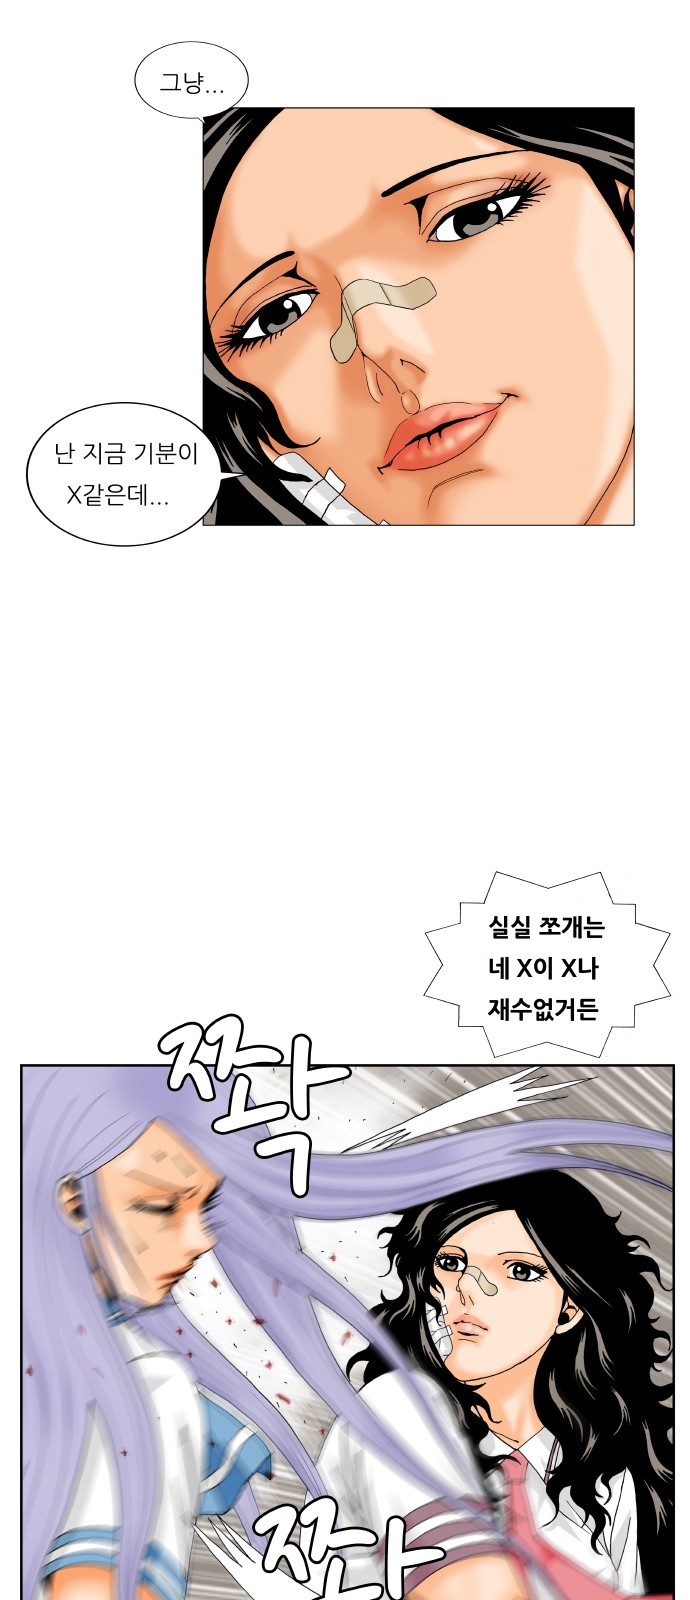 Ultimate Legend - Kang Hae Hyo - Chapter 199 - Page 2